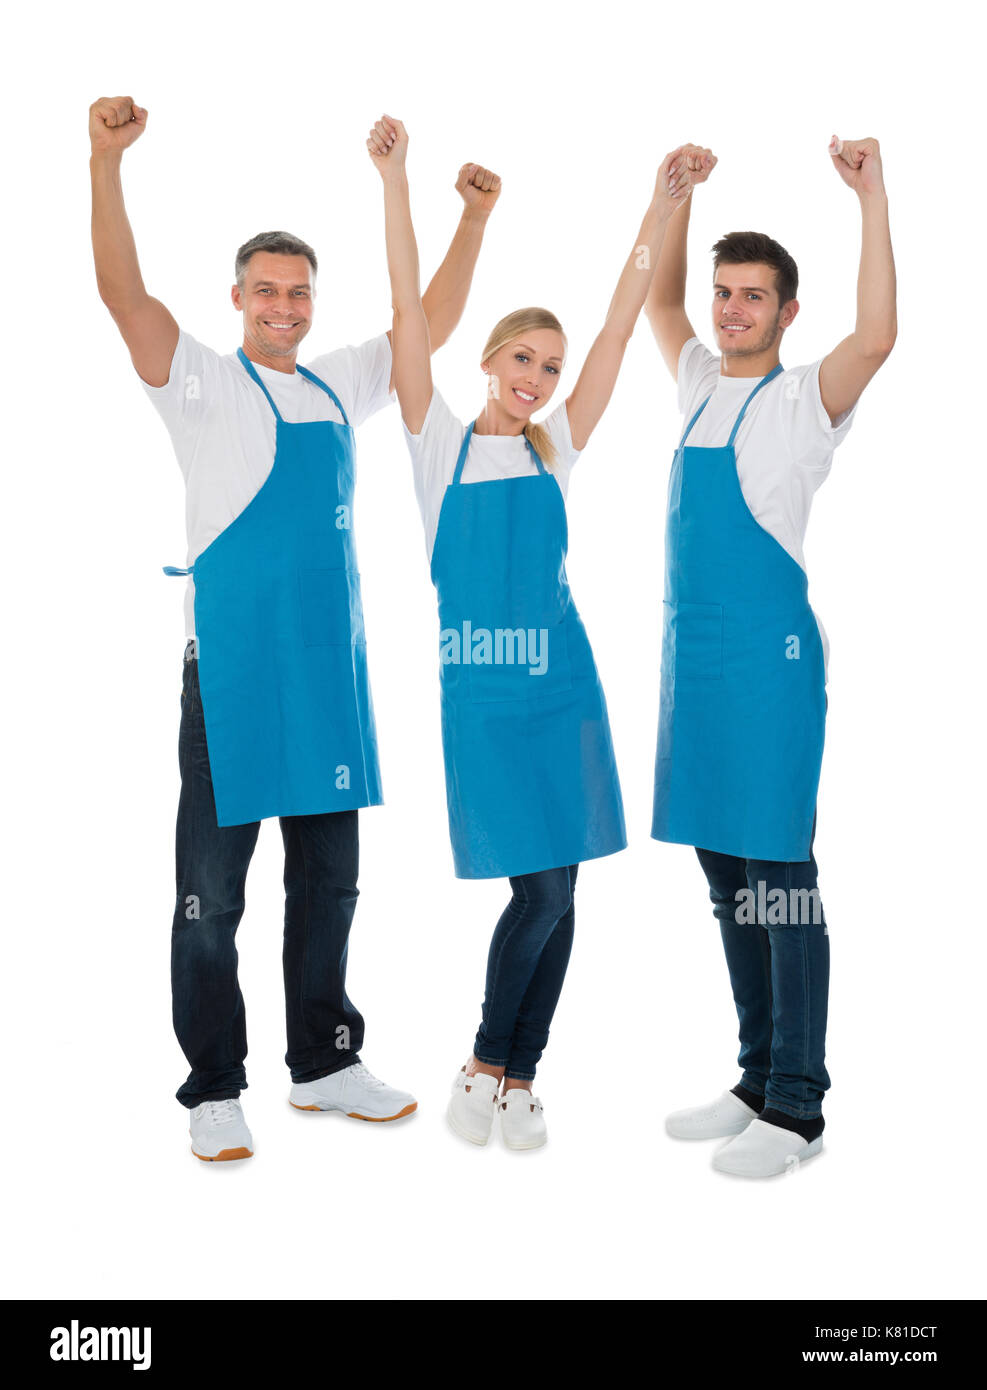 Team Of Happy Cleaners Raising Hands Over White Background Stock Photo